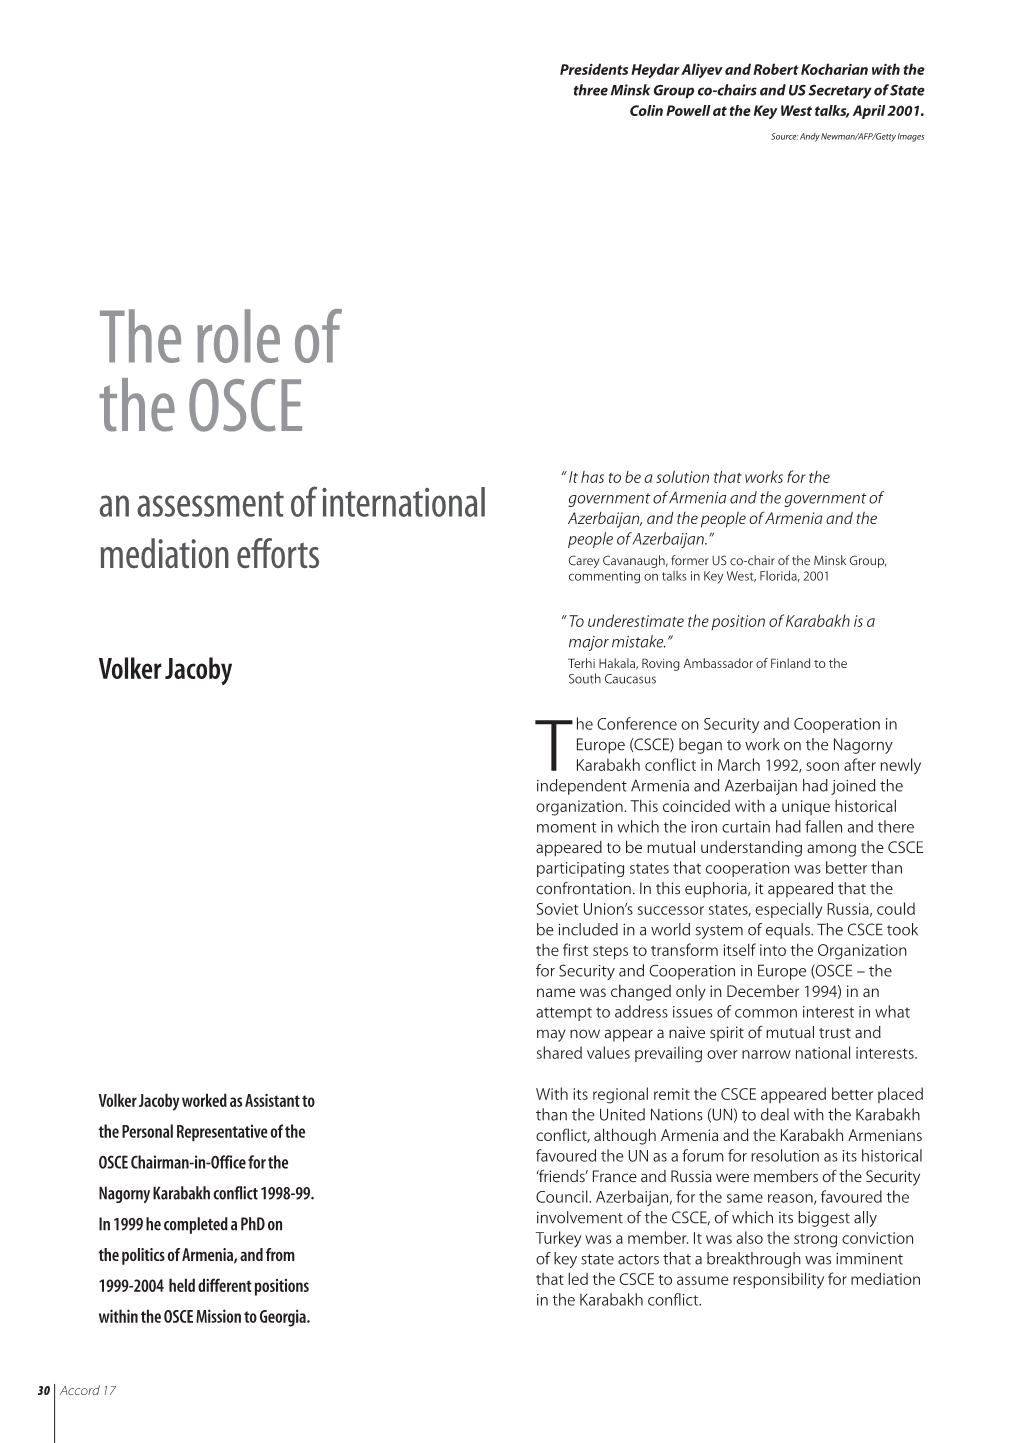 The Role of the OSCE